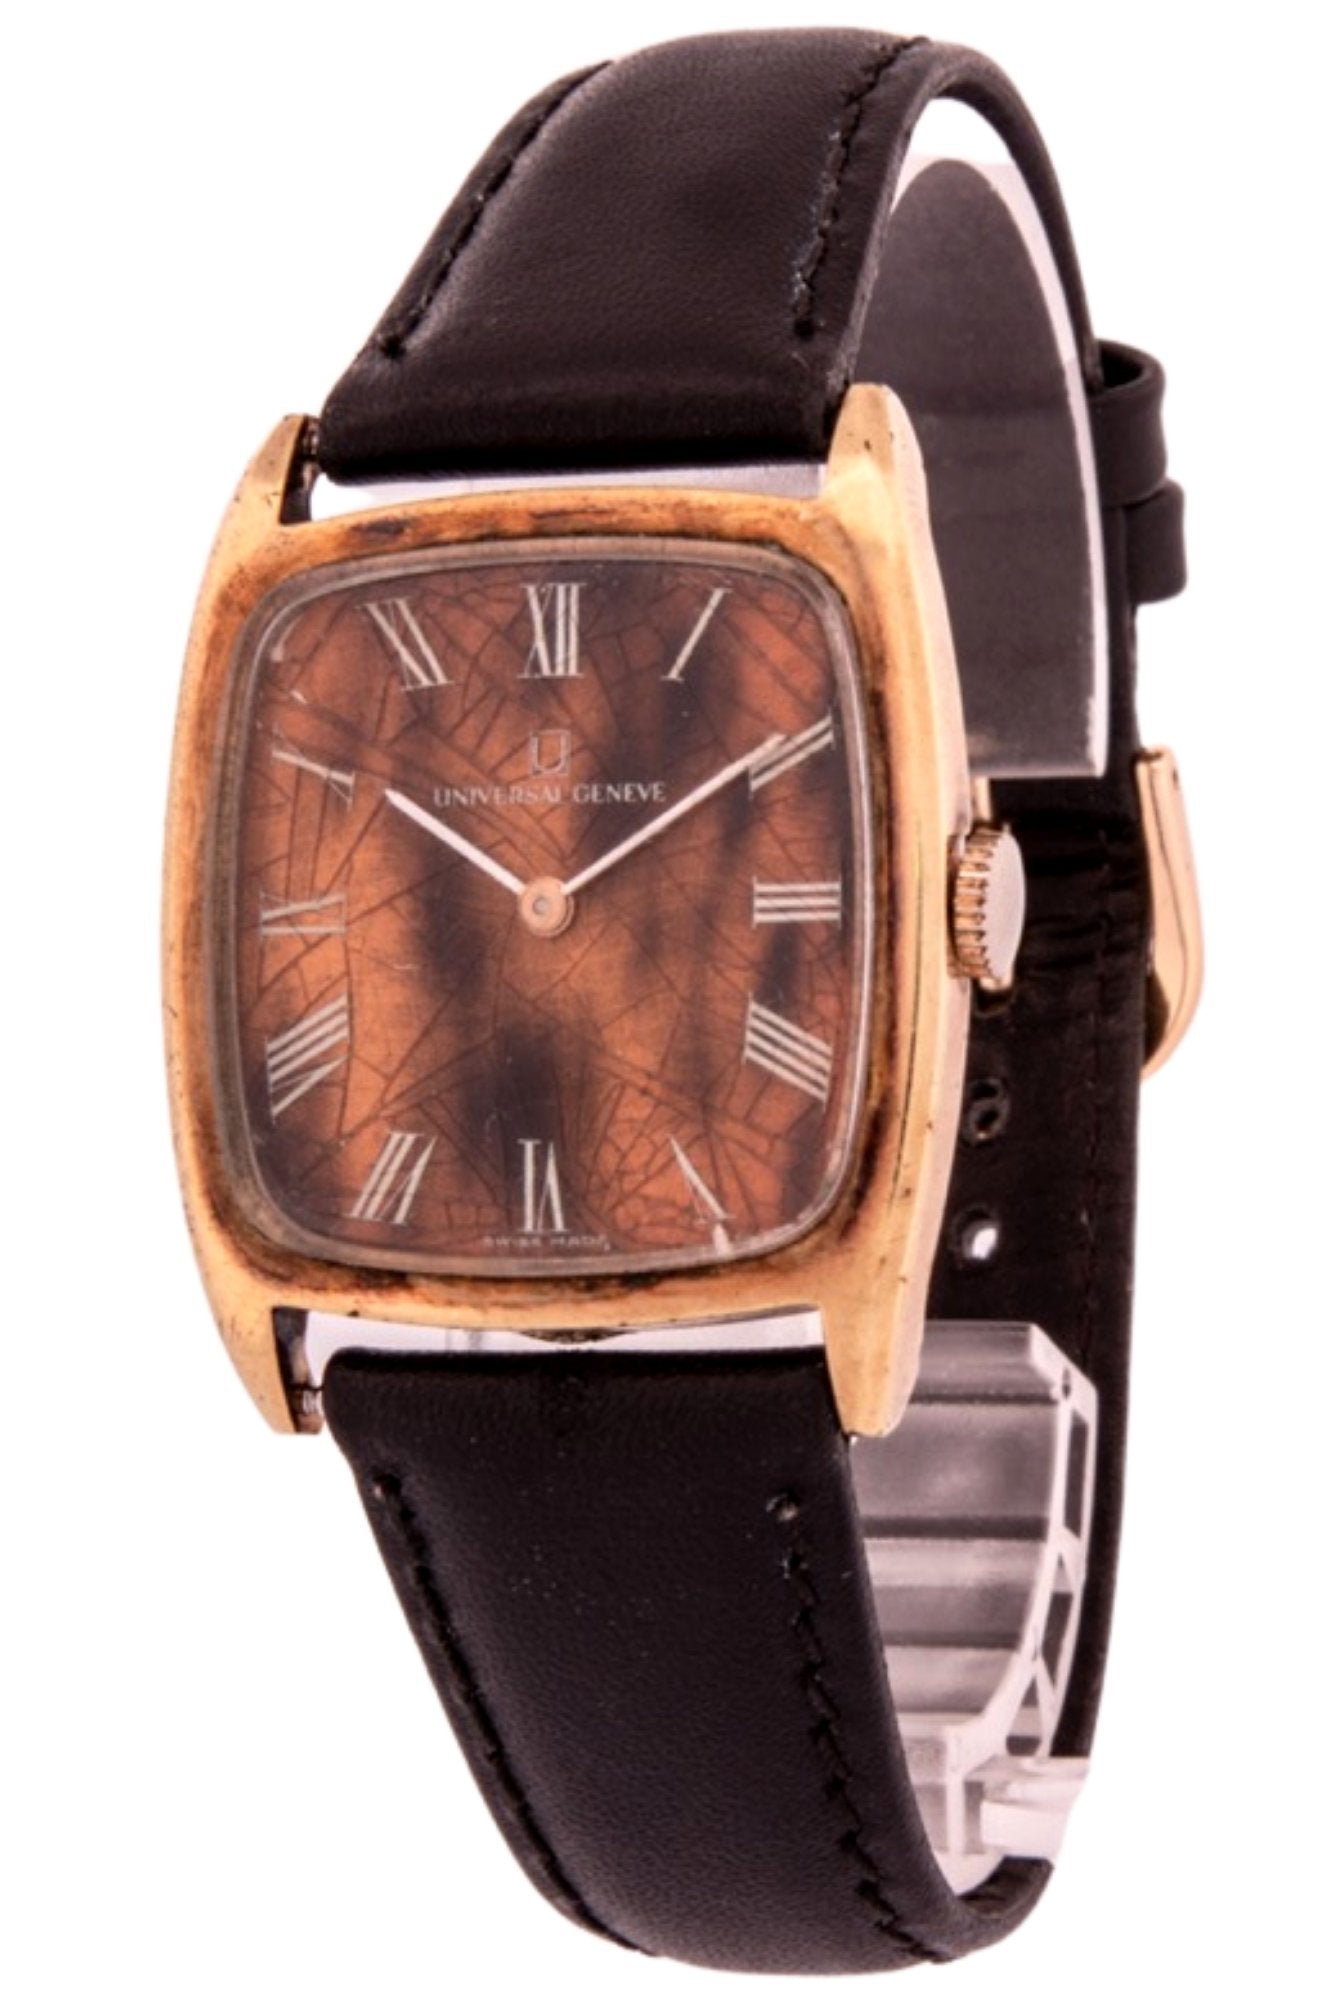 Universal Geneve Tortoise Shell - Counting Time Watch Purveyors